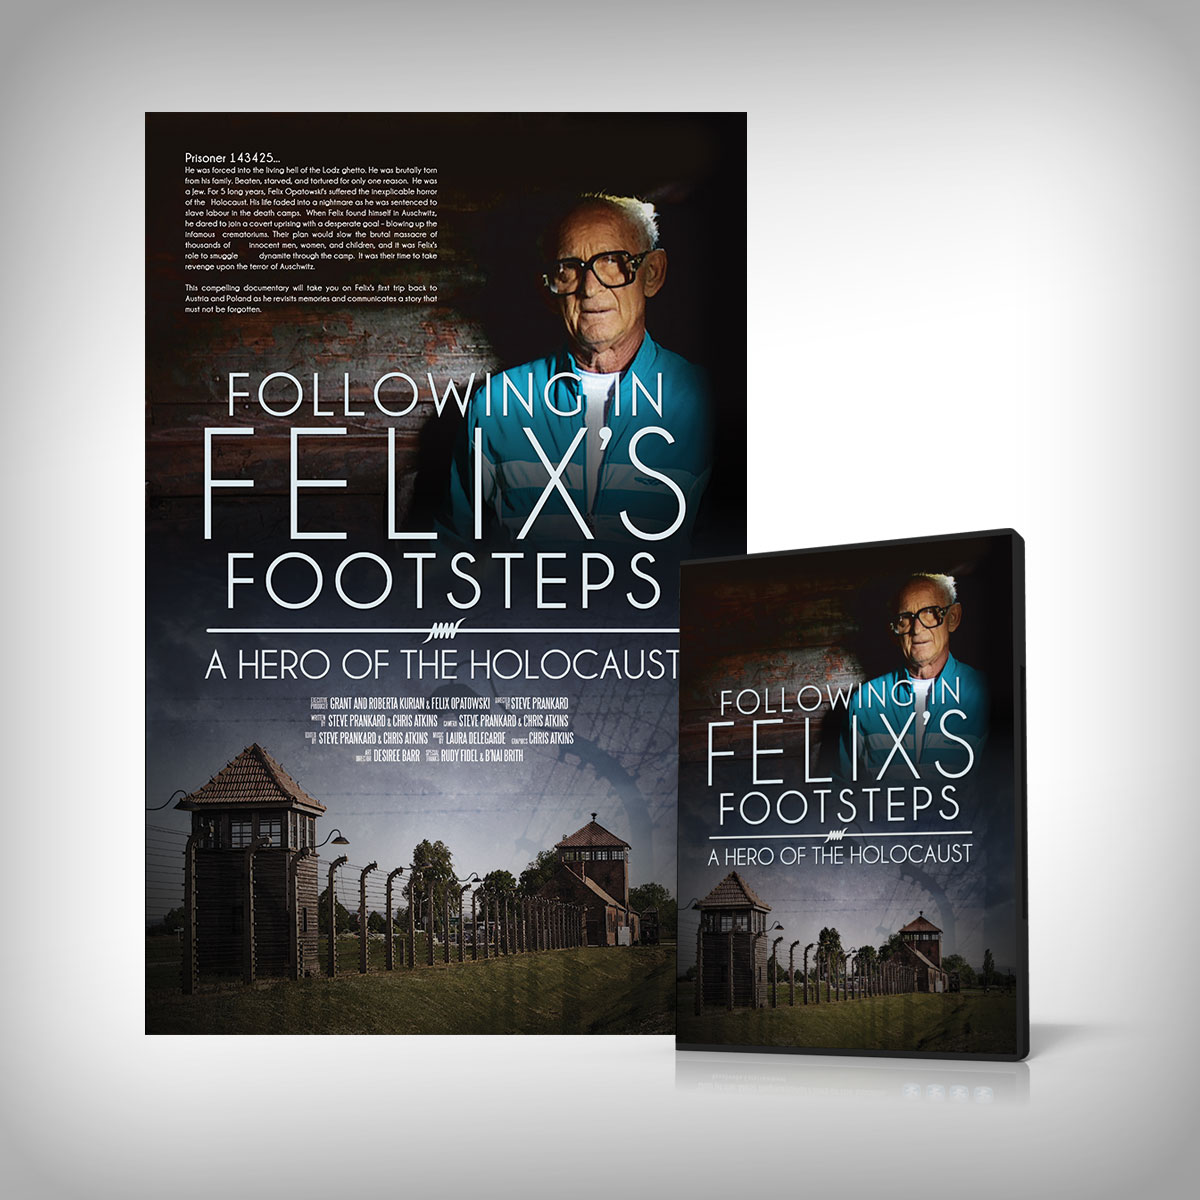 Following in Felix's Footsteps Poster and DVD Cover